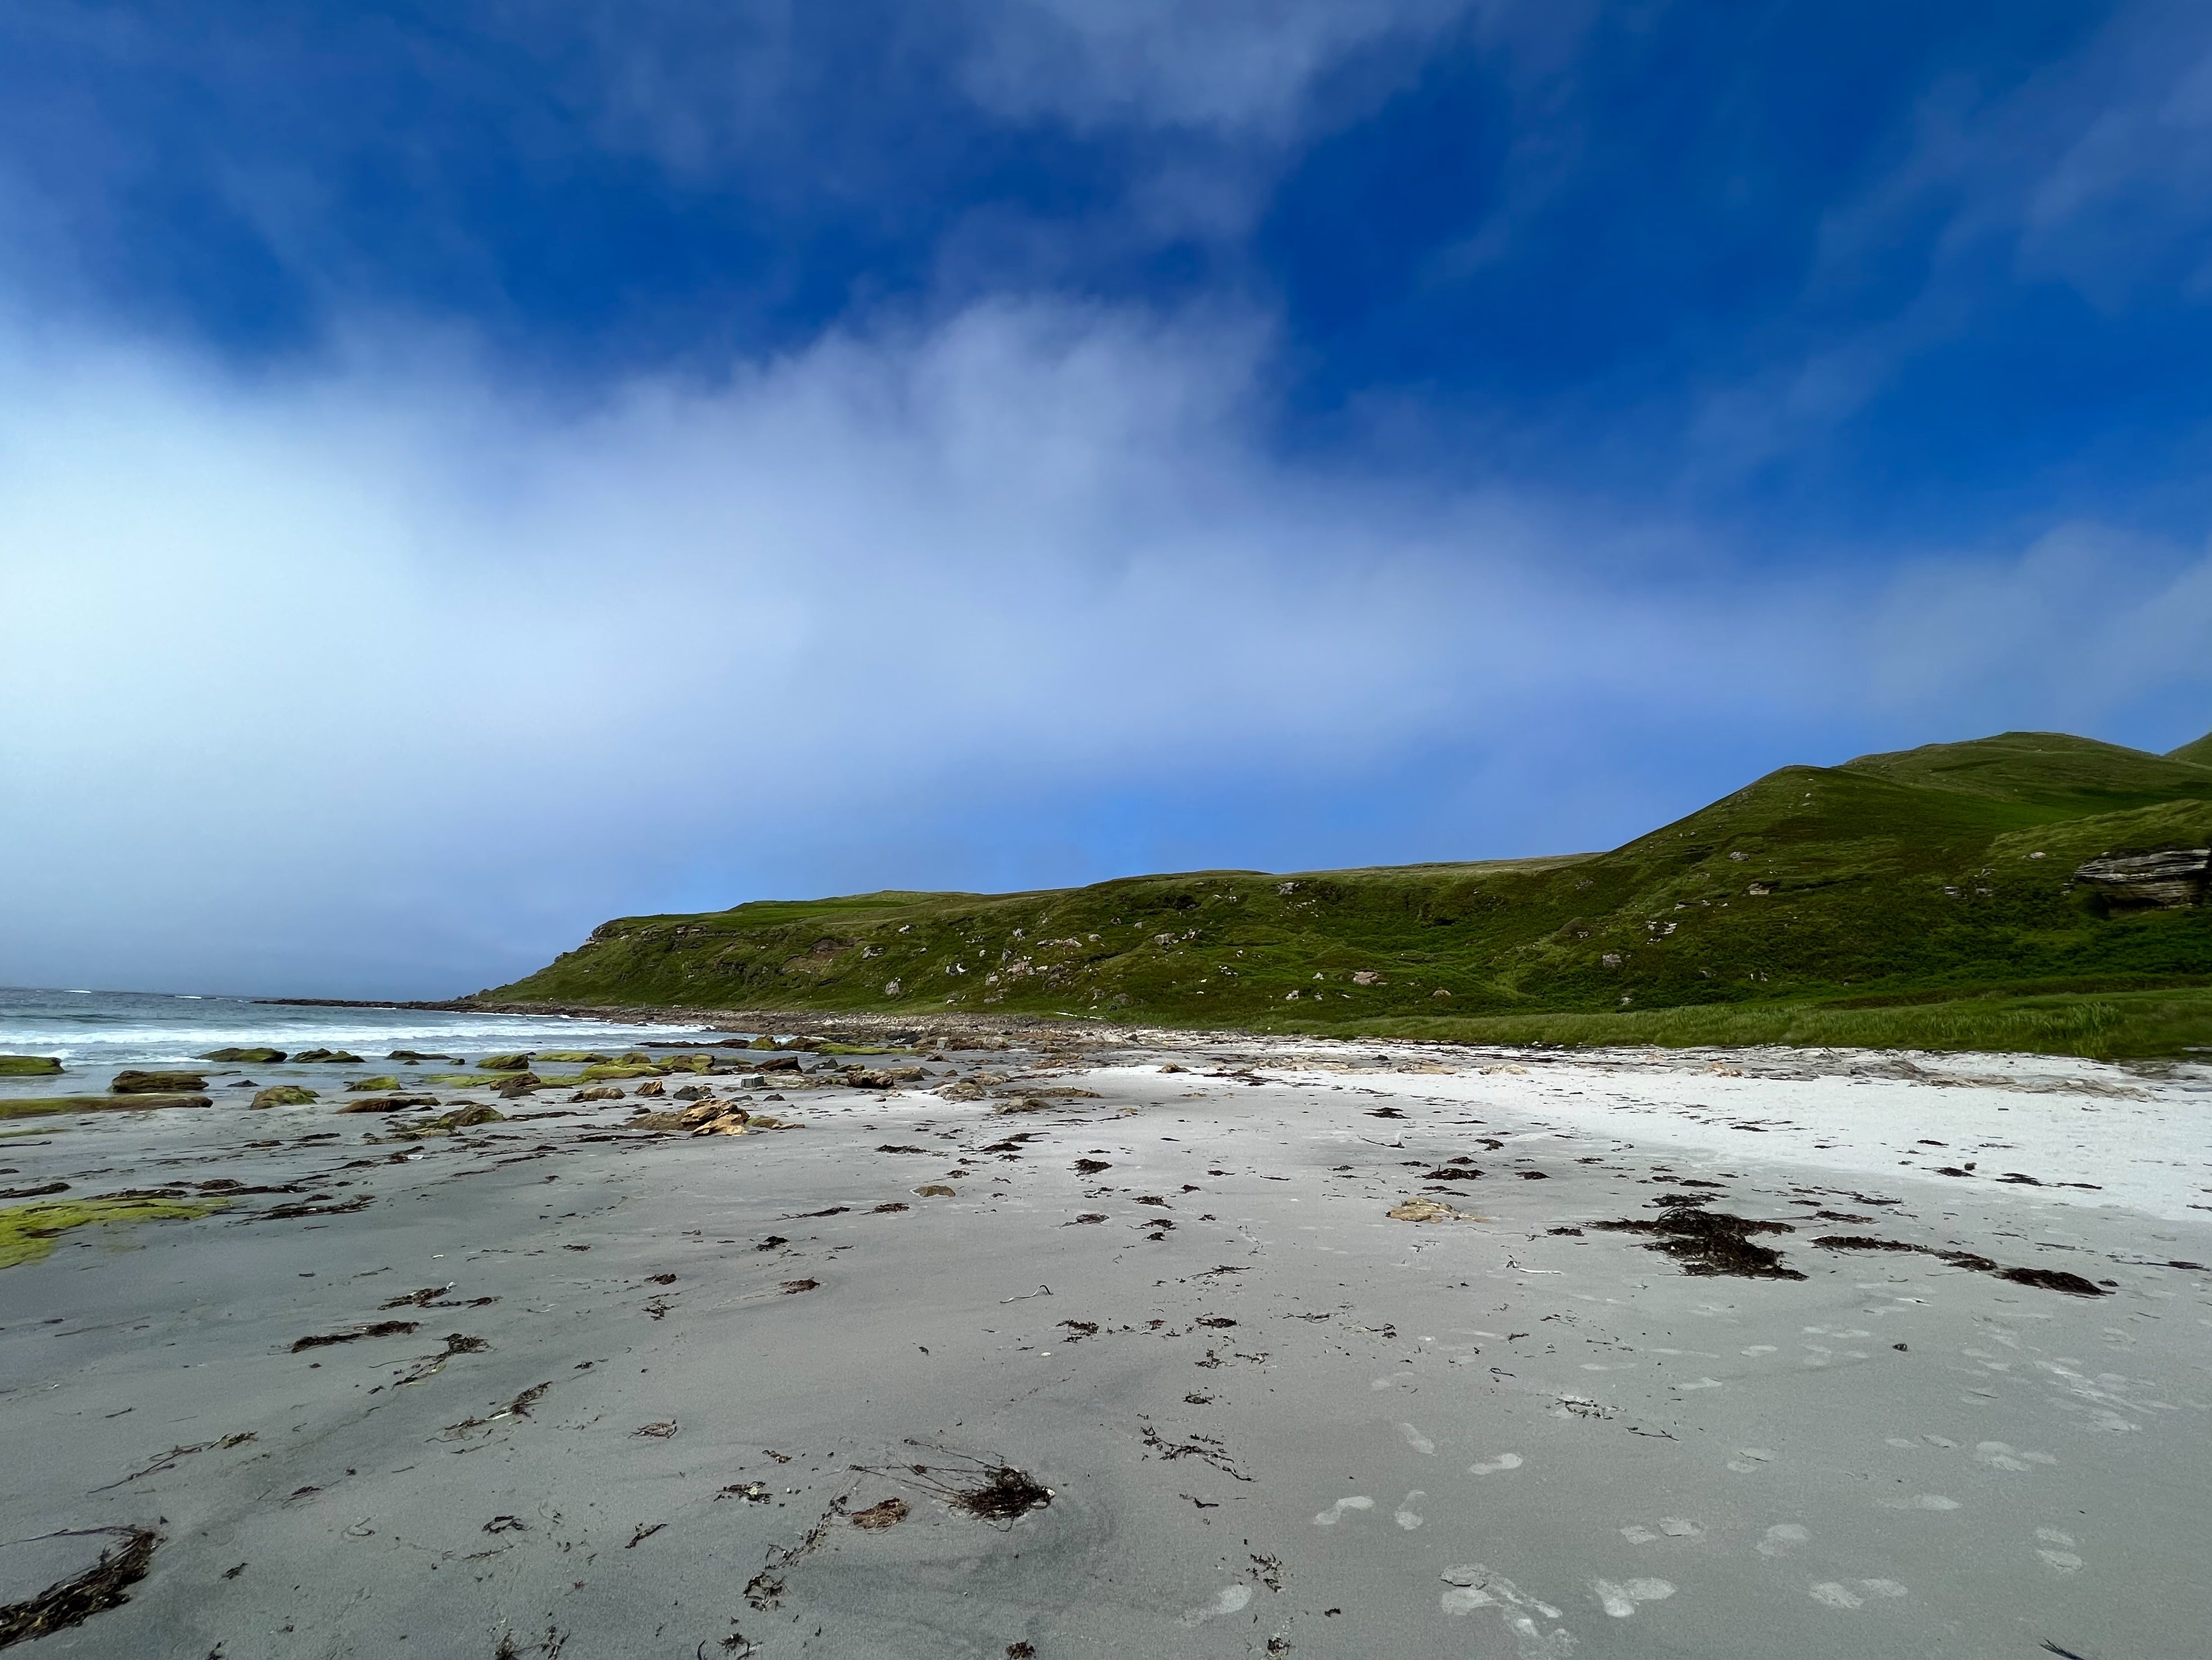 Green dreams are made of this: a beach on Eigg